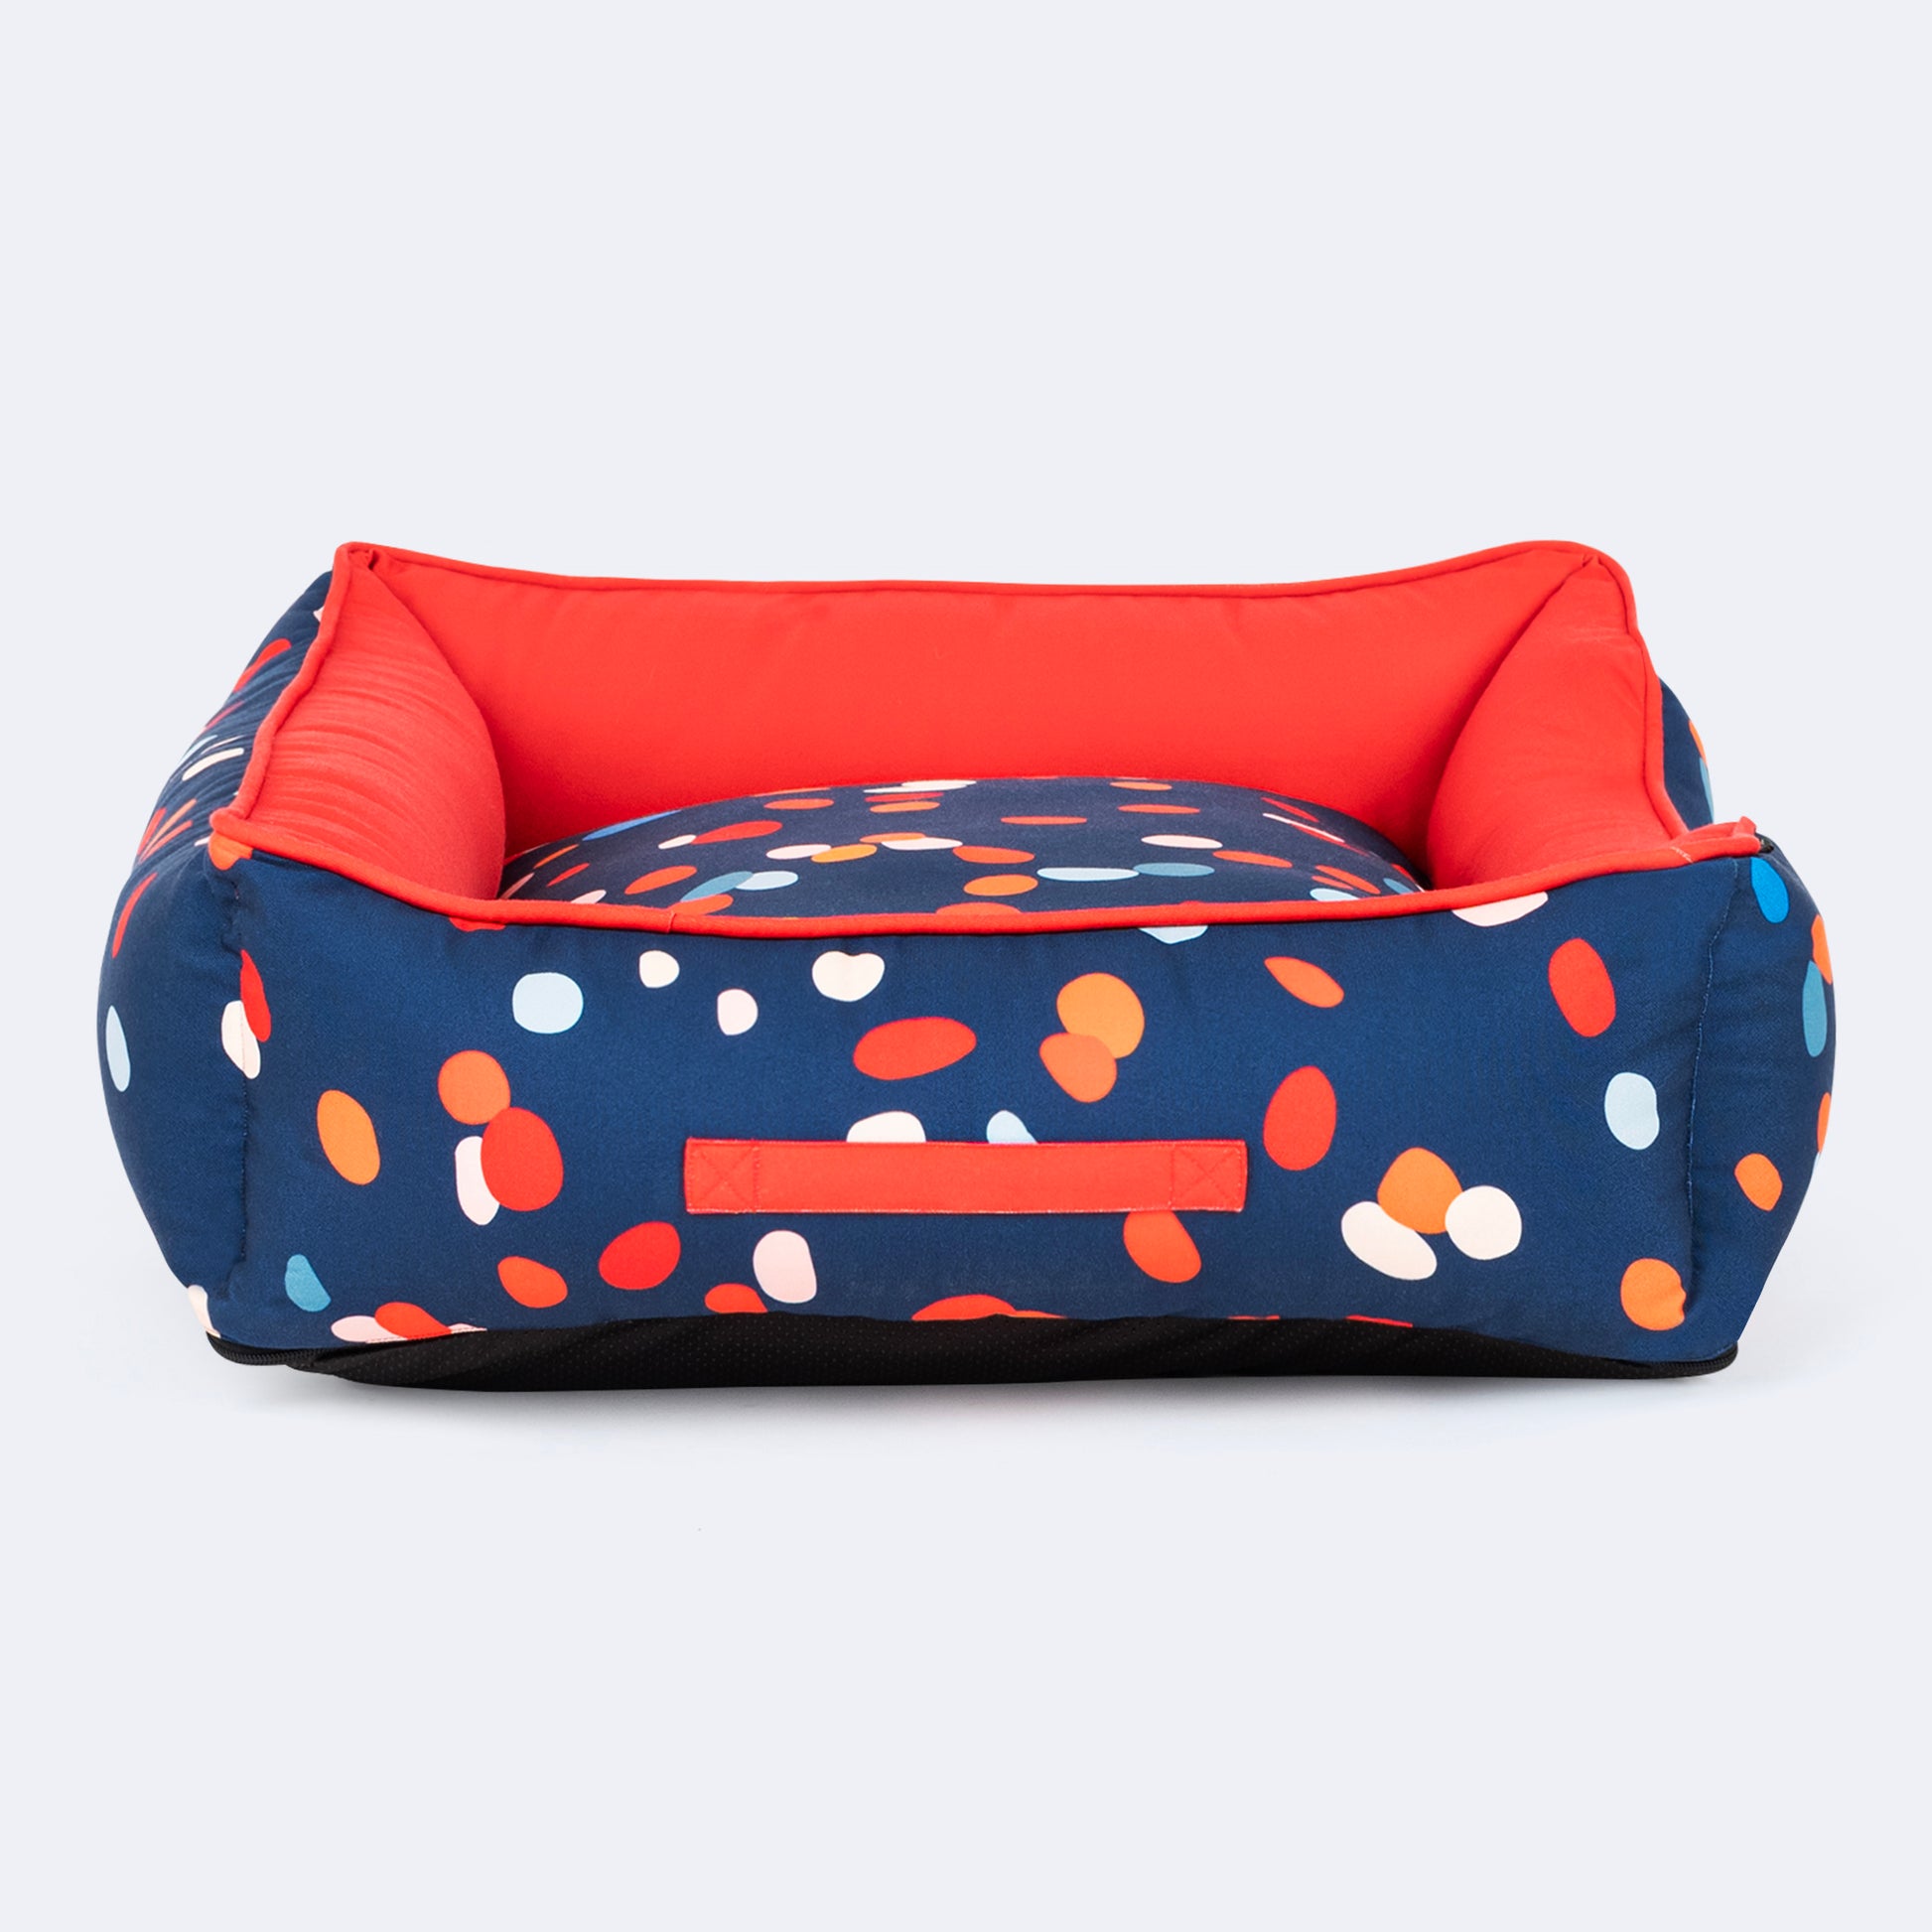 HUFT Colour Pop Personalised Lounger Bed For Dog - Navy Blue - Heads Up For Tails